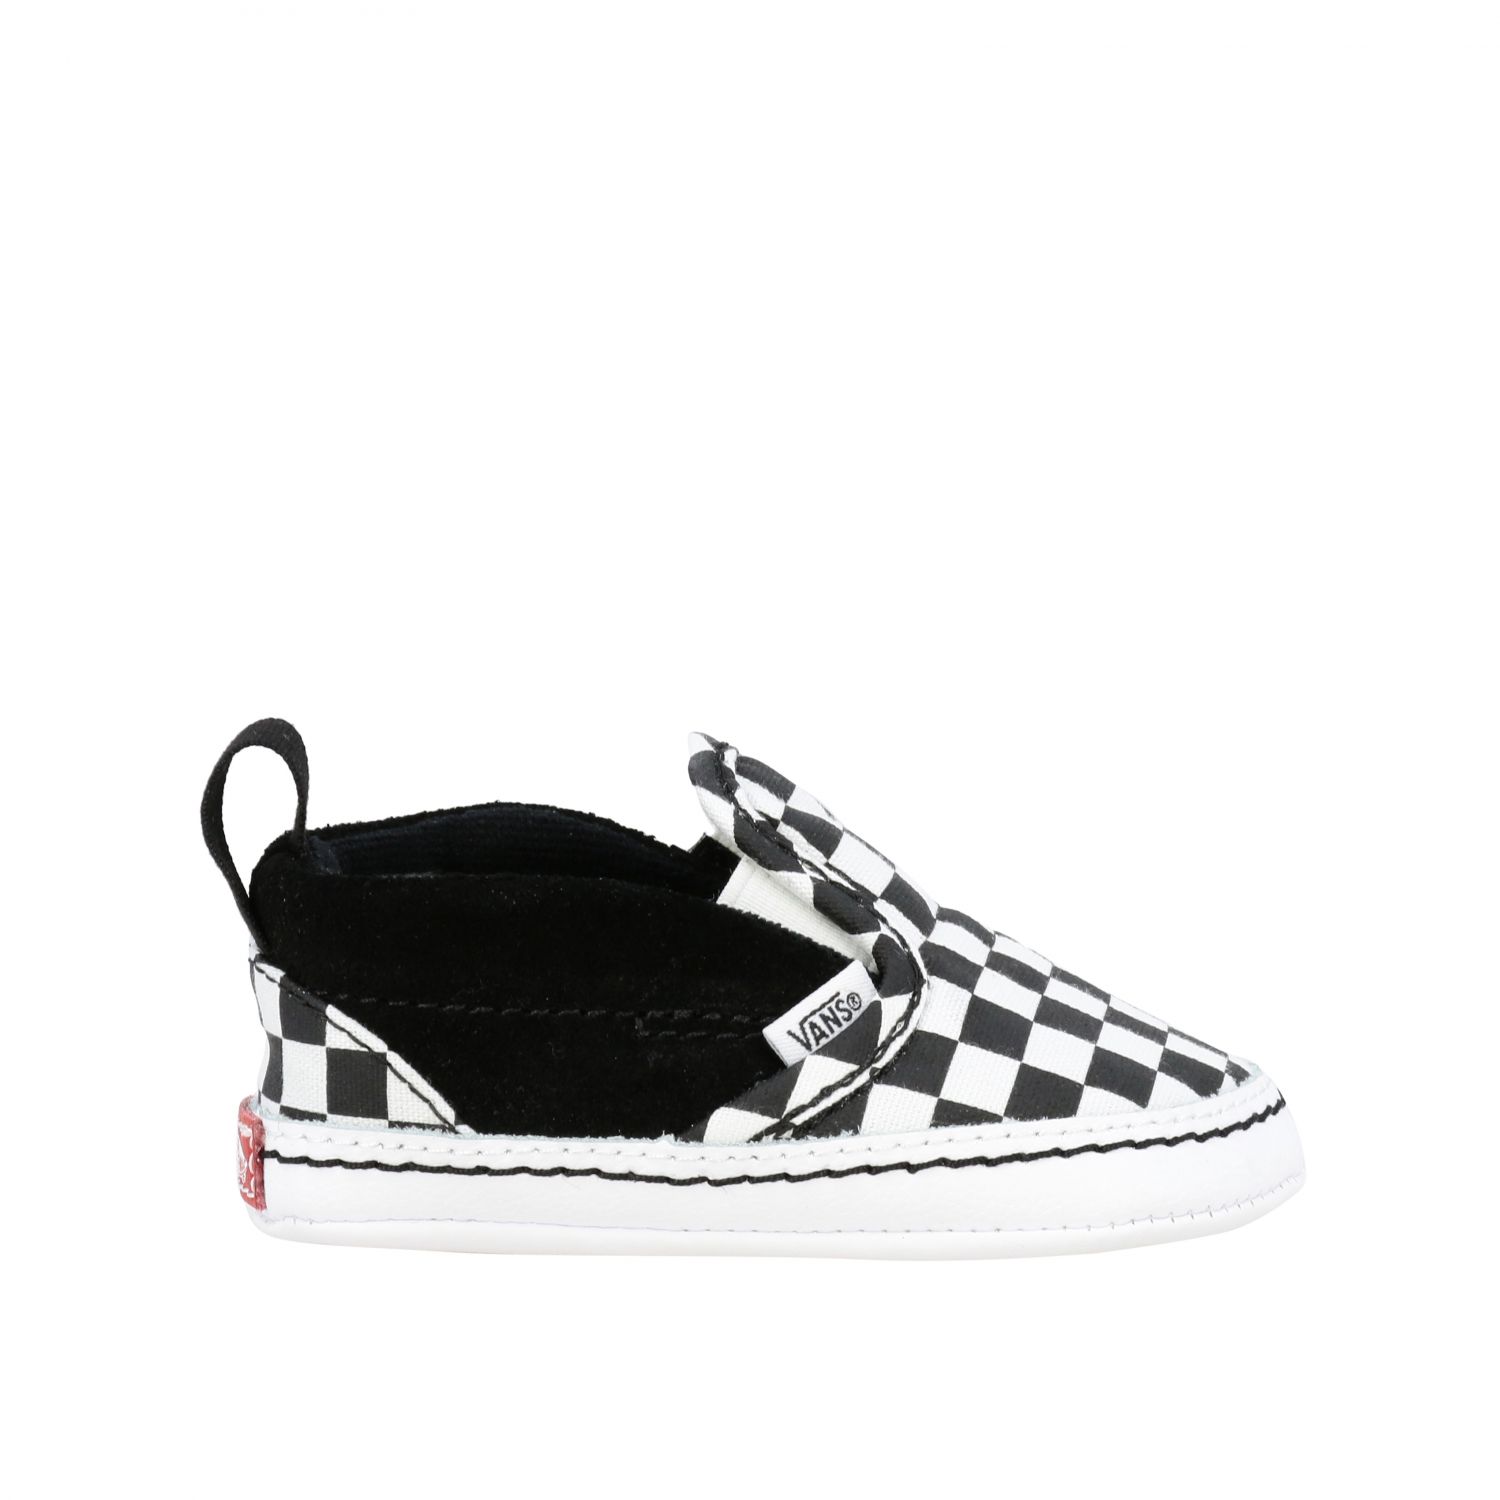 Vans Outlet: Sneakers Classic slip on in tela a scacchi - Nero | Sneakers Vans VN0A38F7V GIGLIO.COM